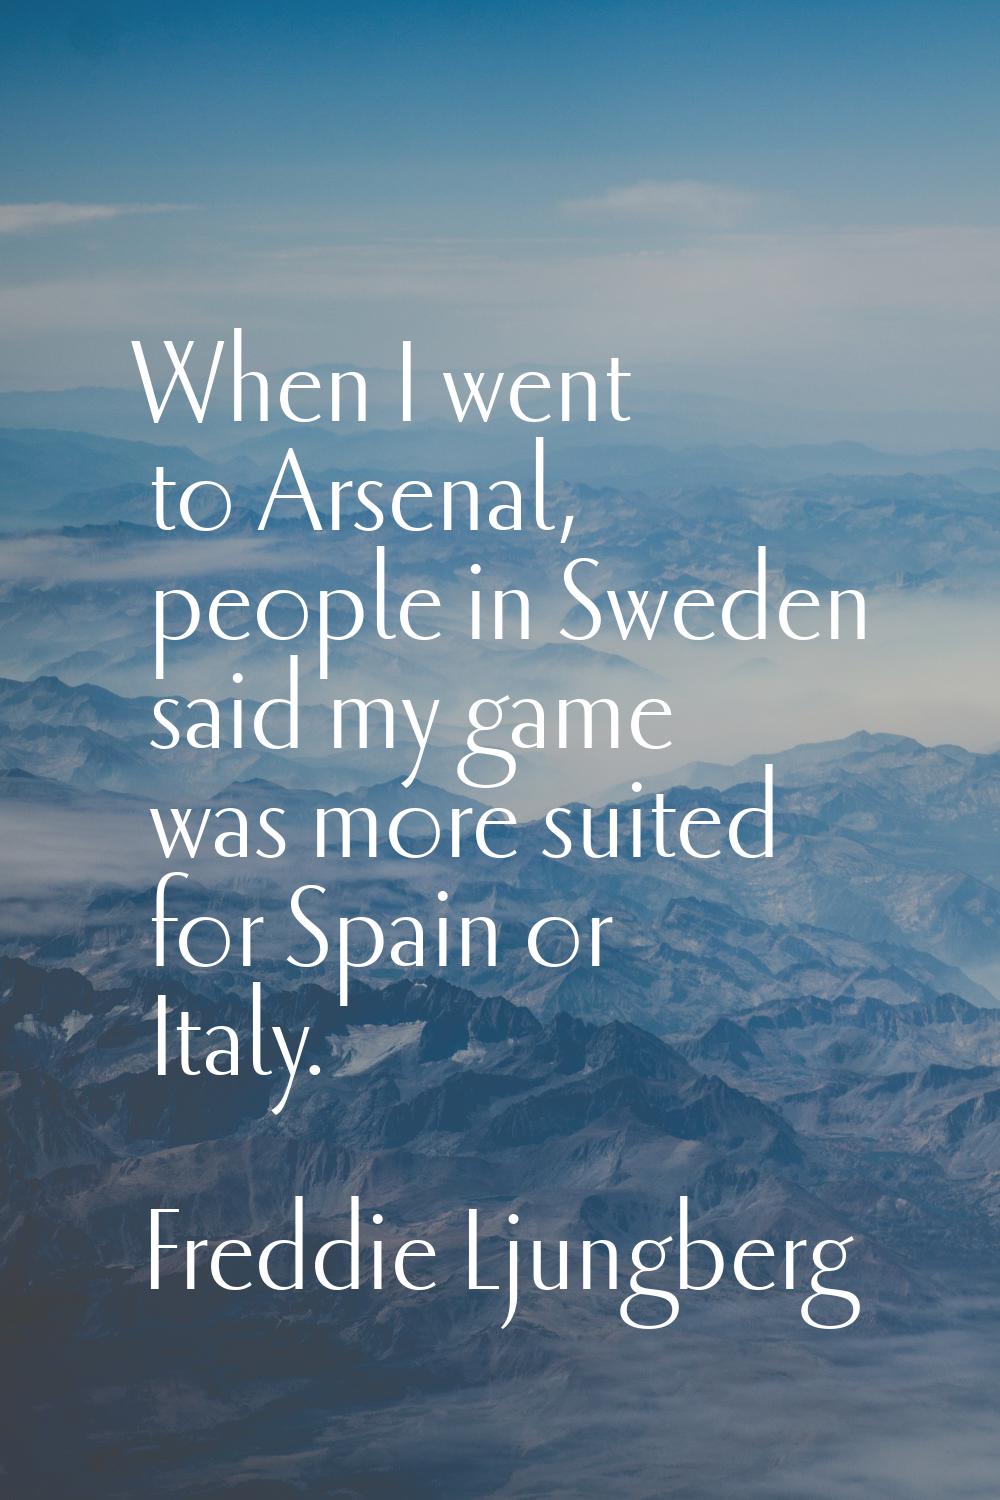 When I went to Arsenal, people in Sweden said my game was more suited for Spain or Italy.